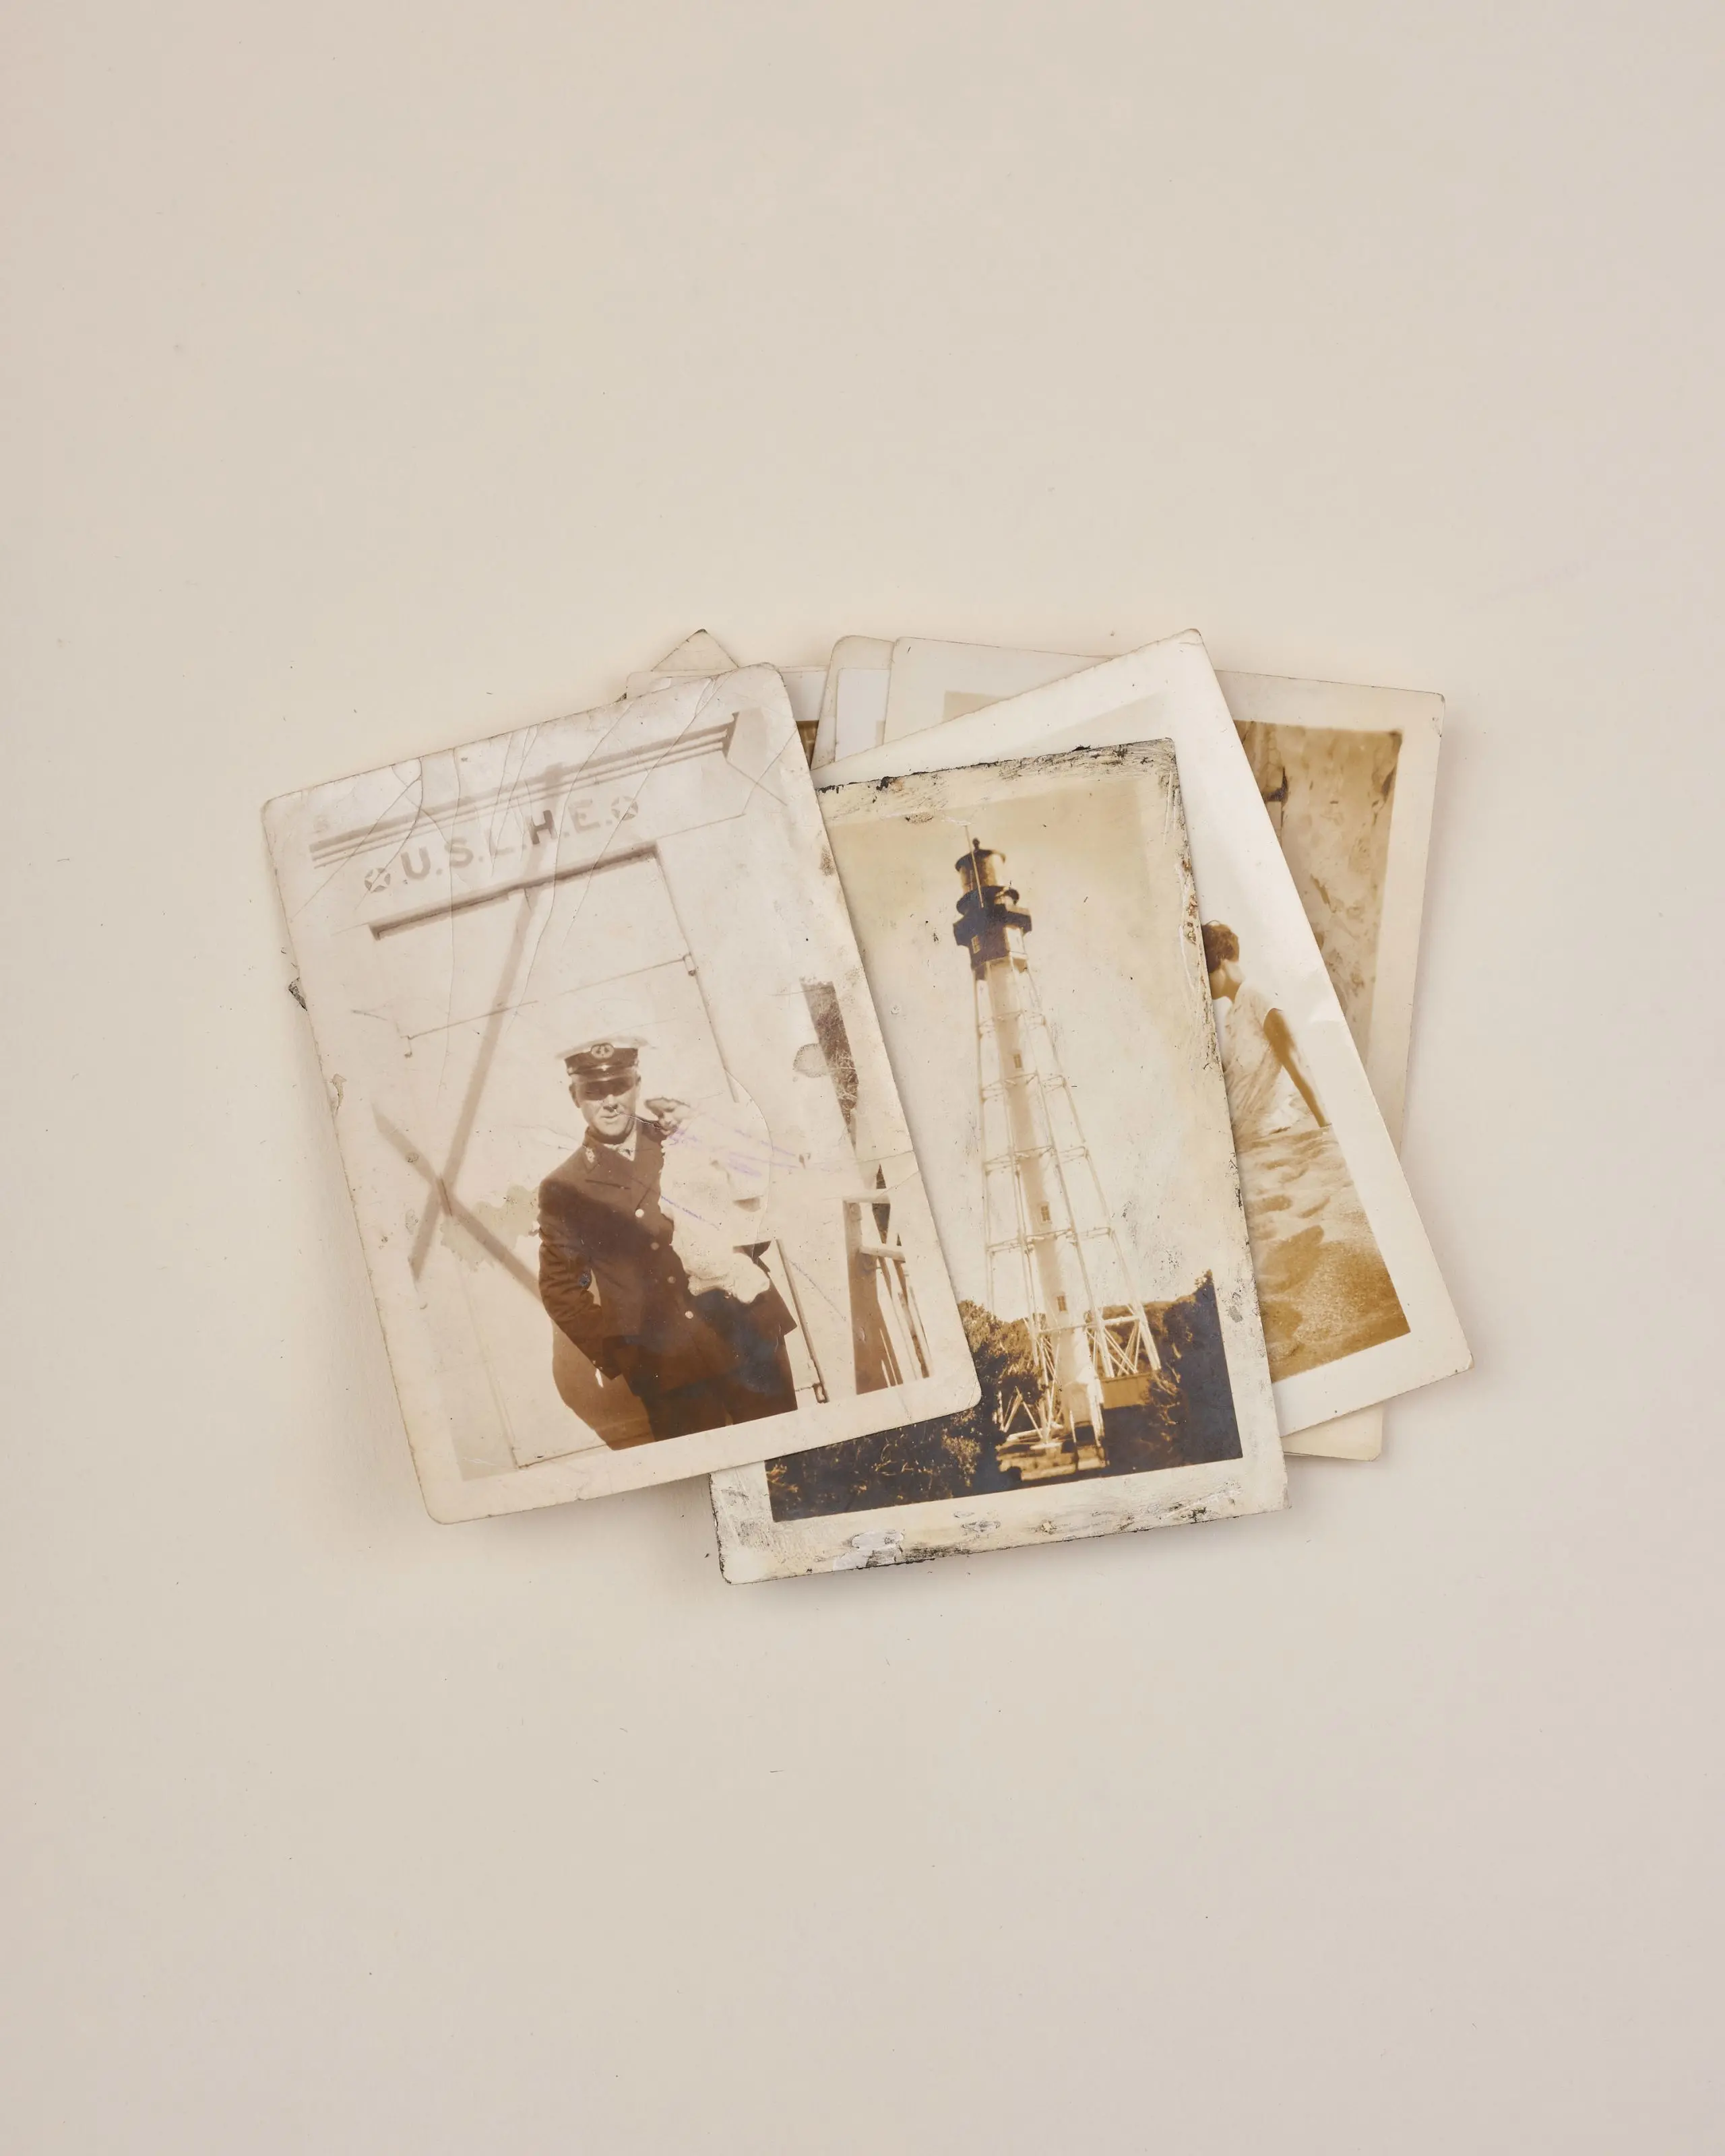 Dawn Taylor's photographs of her great grandfather, Devaney Farrow Jennette, who was a lighthouse keeper at the Cape Fear Lighthouse